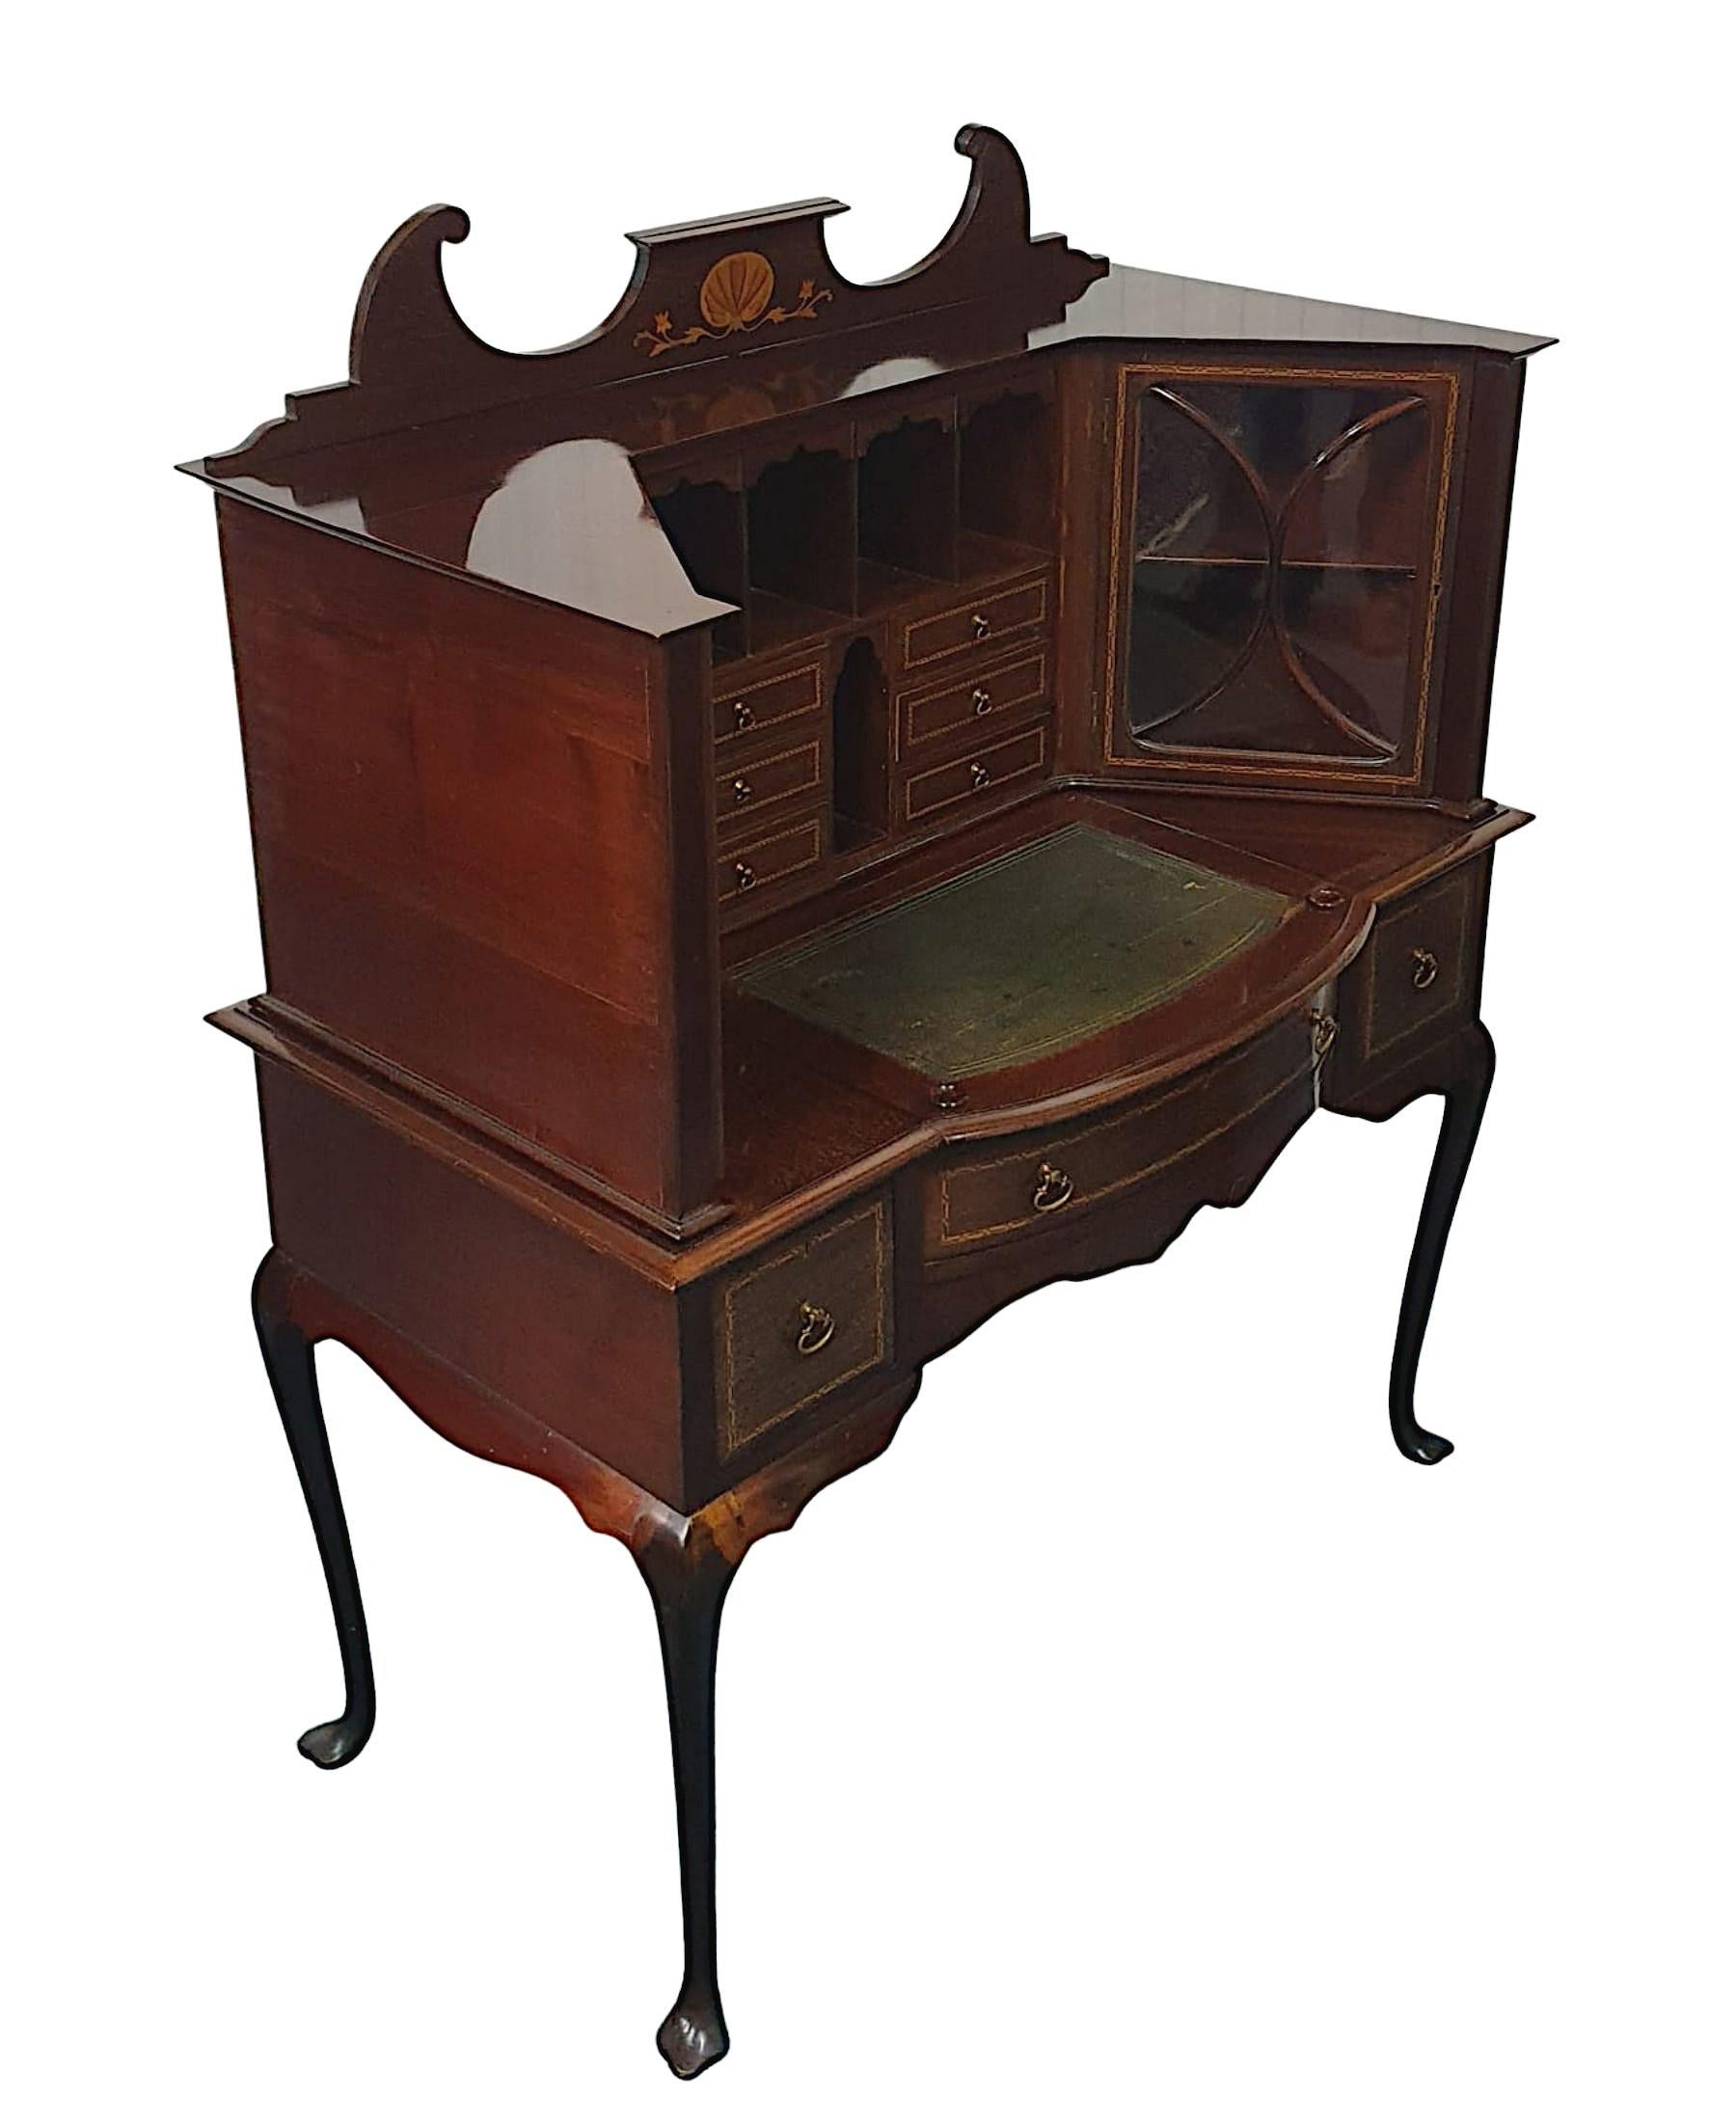 A very fine Edwardian mahogany ladies desk or vanity cabinet, the broken swan neck pediment inlaid with shell and scrolling foliate motif raised over a pair of astragal glazed cabinet doors with shelved interior flanking fitted letter racks and six